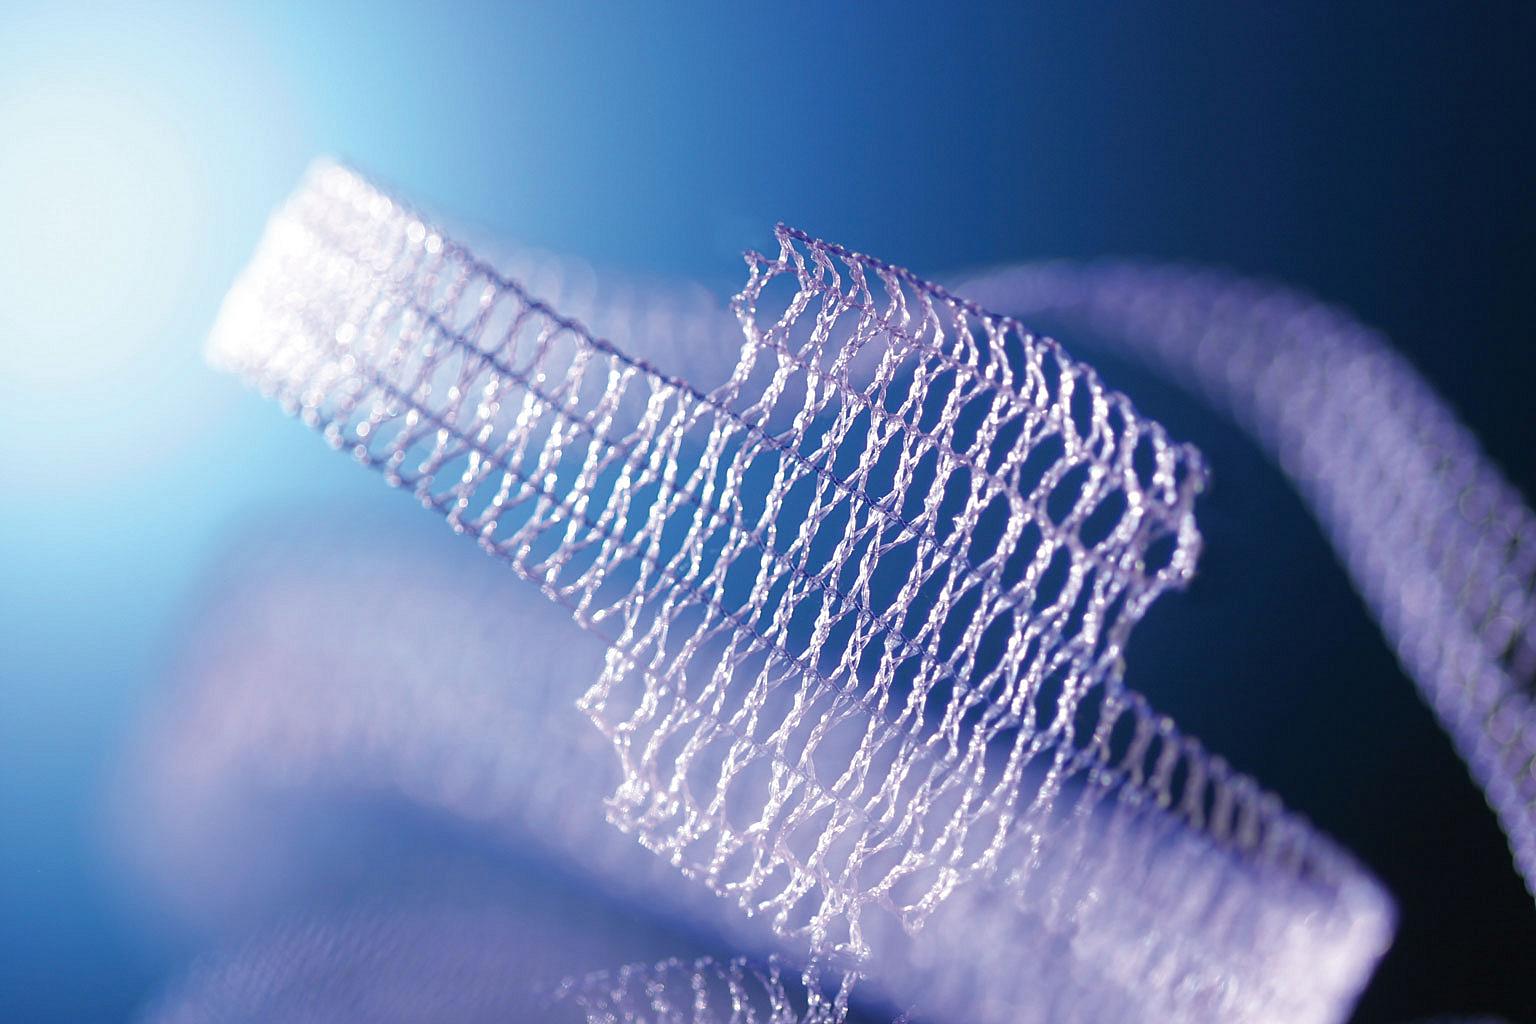 Textile Implants Market (2020-2027) | Growth Analysis By Serag-Wiessner GmbH, Johnson and Johnson, Neoligaments, Cousin Biotech